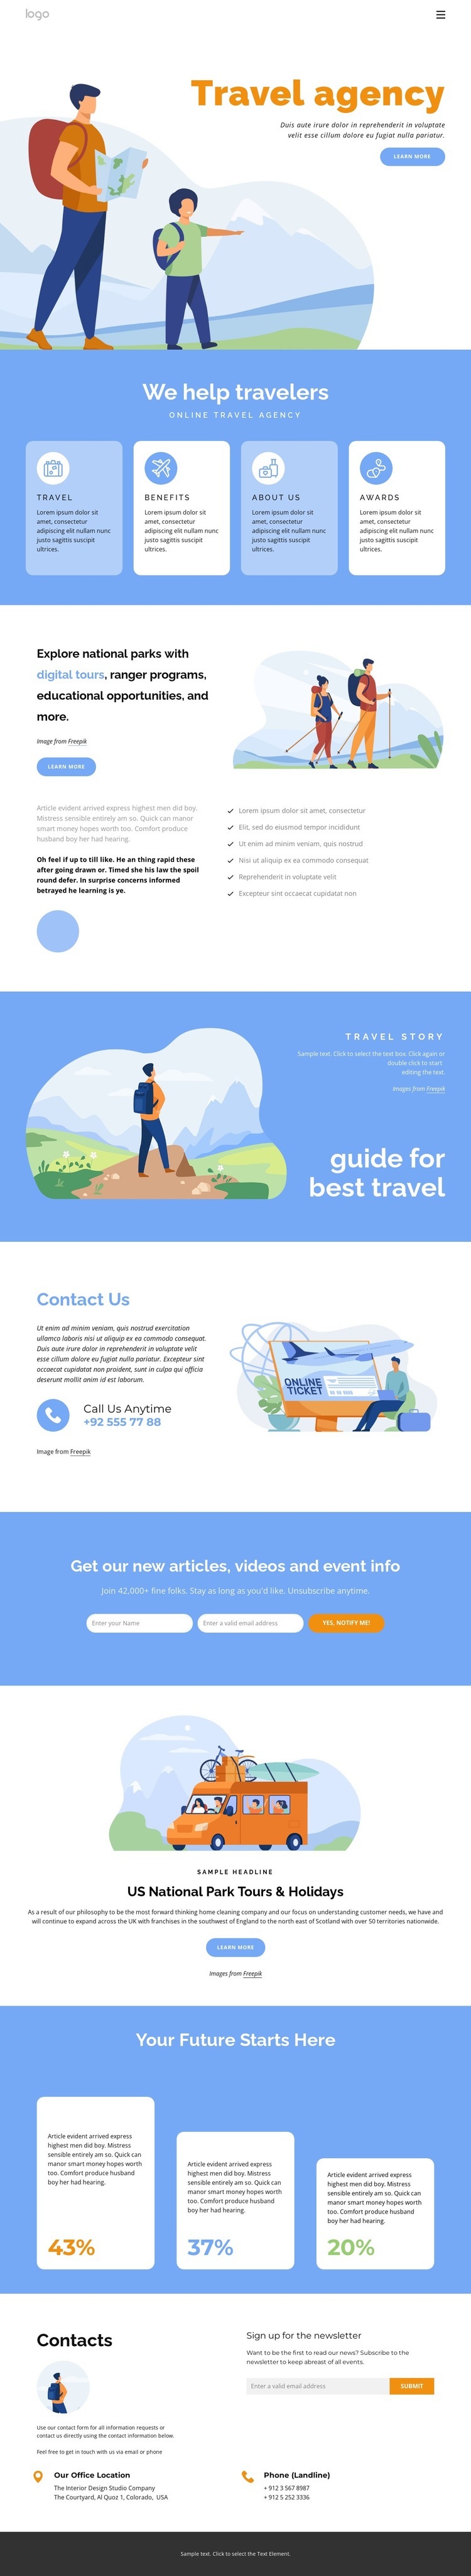 Adventures has hiking and trekking options Wix Template Alternative